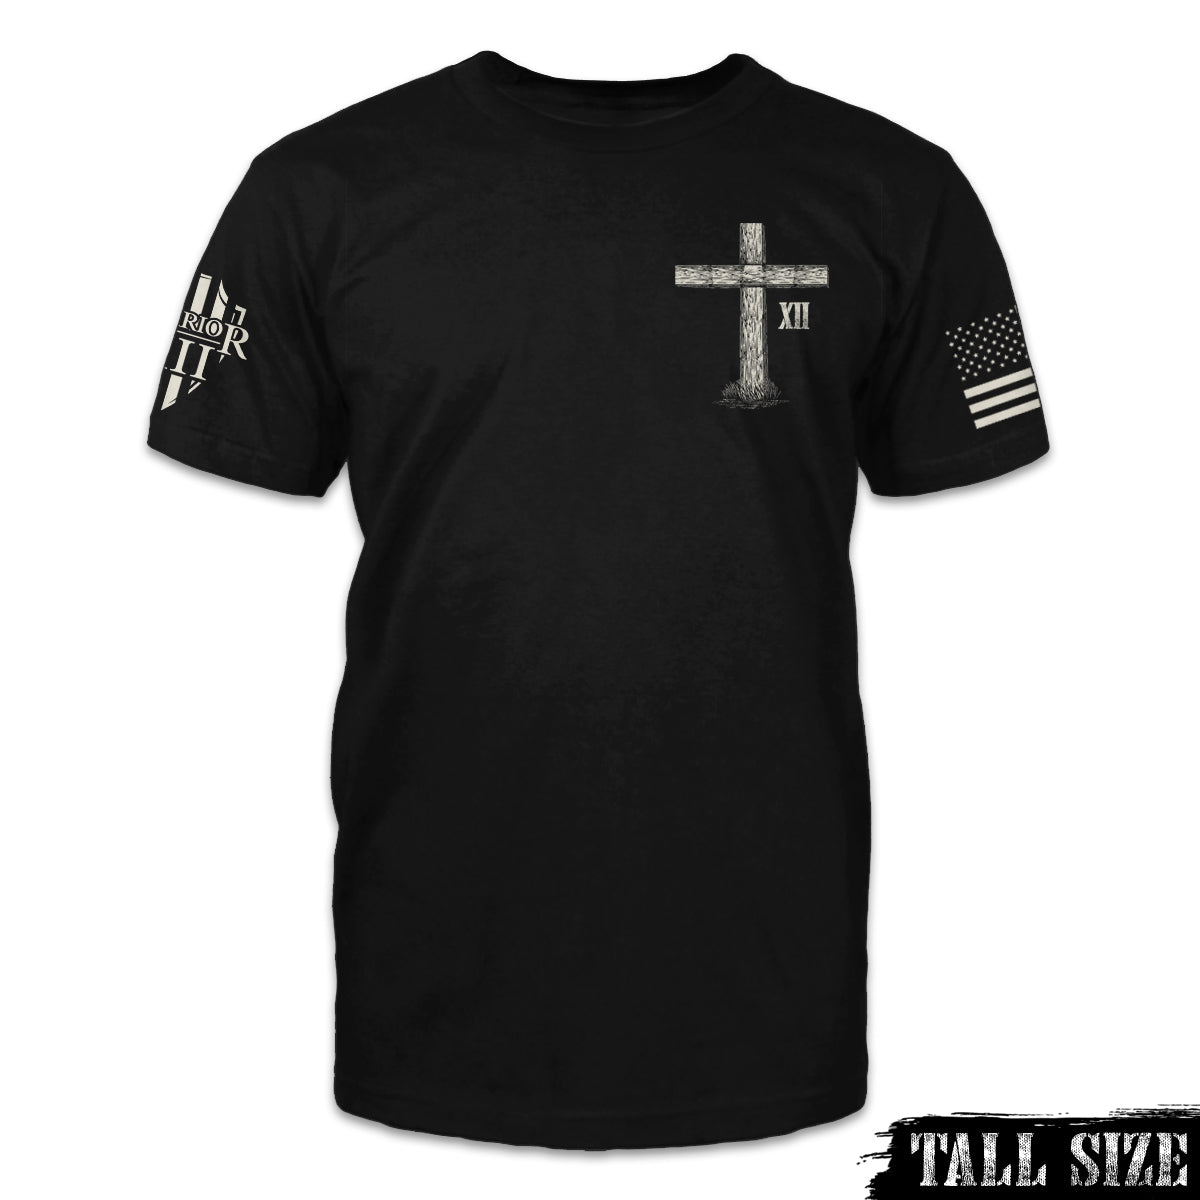 A black tall size shirt with a cross printed on the front.